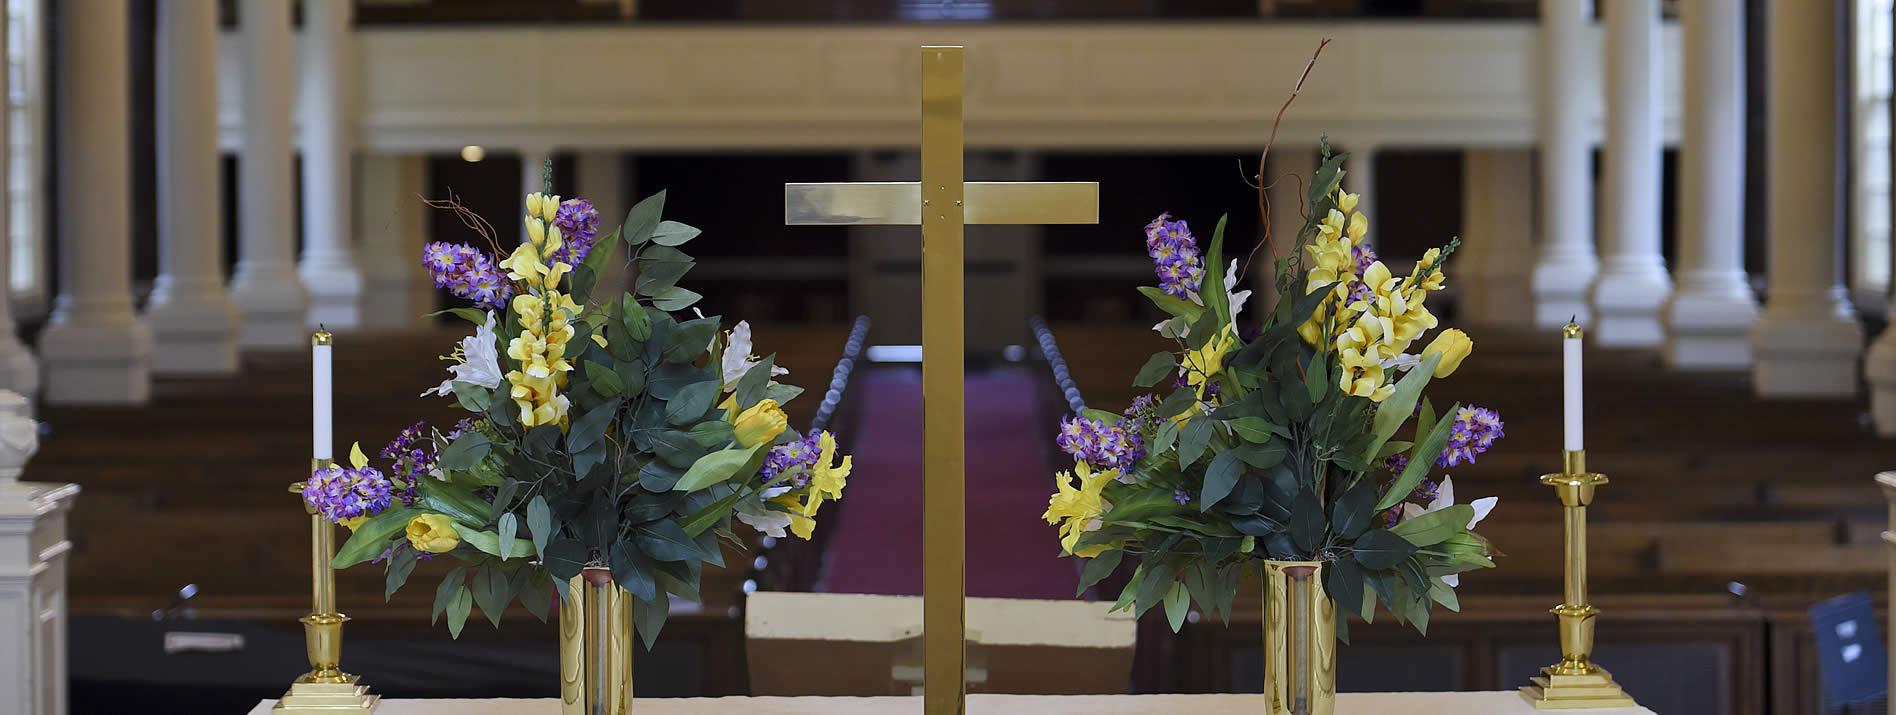 Church altar with purple and yellow flowers